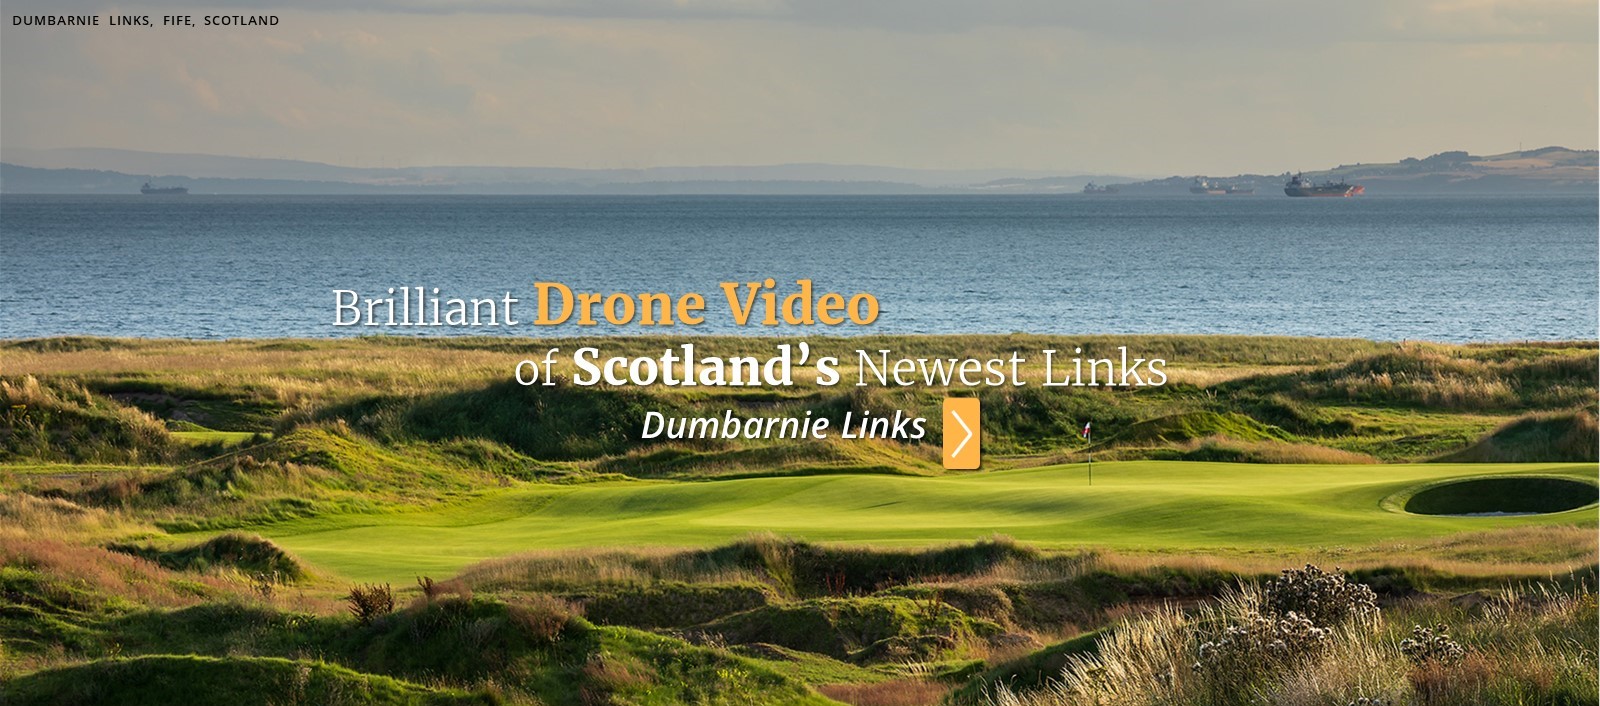 Watch VIDEO: Brilliant Drone Footage of Scotland's Newest Links Course, Dumbarnie Links - PerryGolf.com